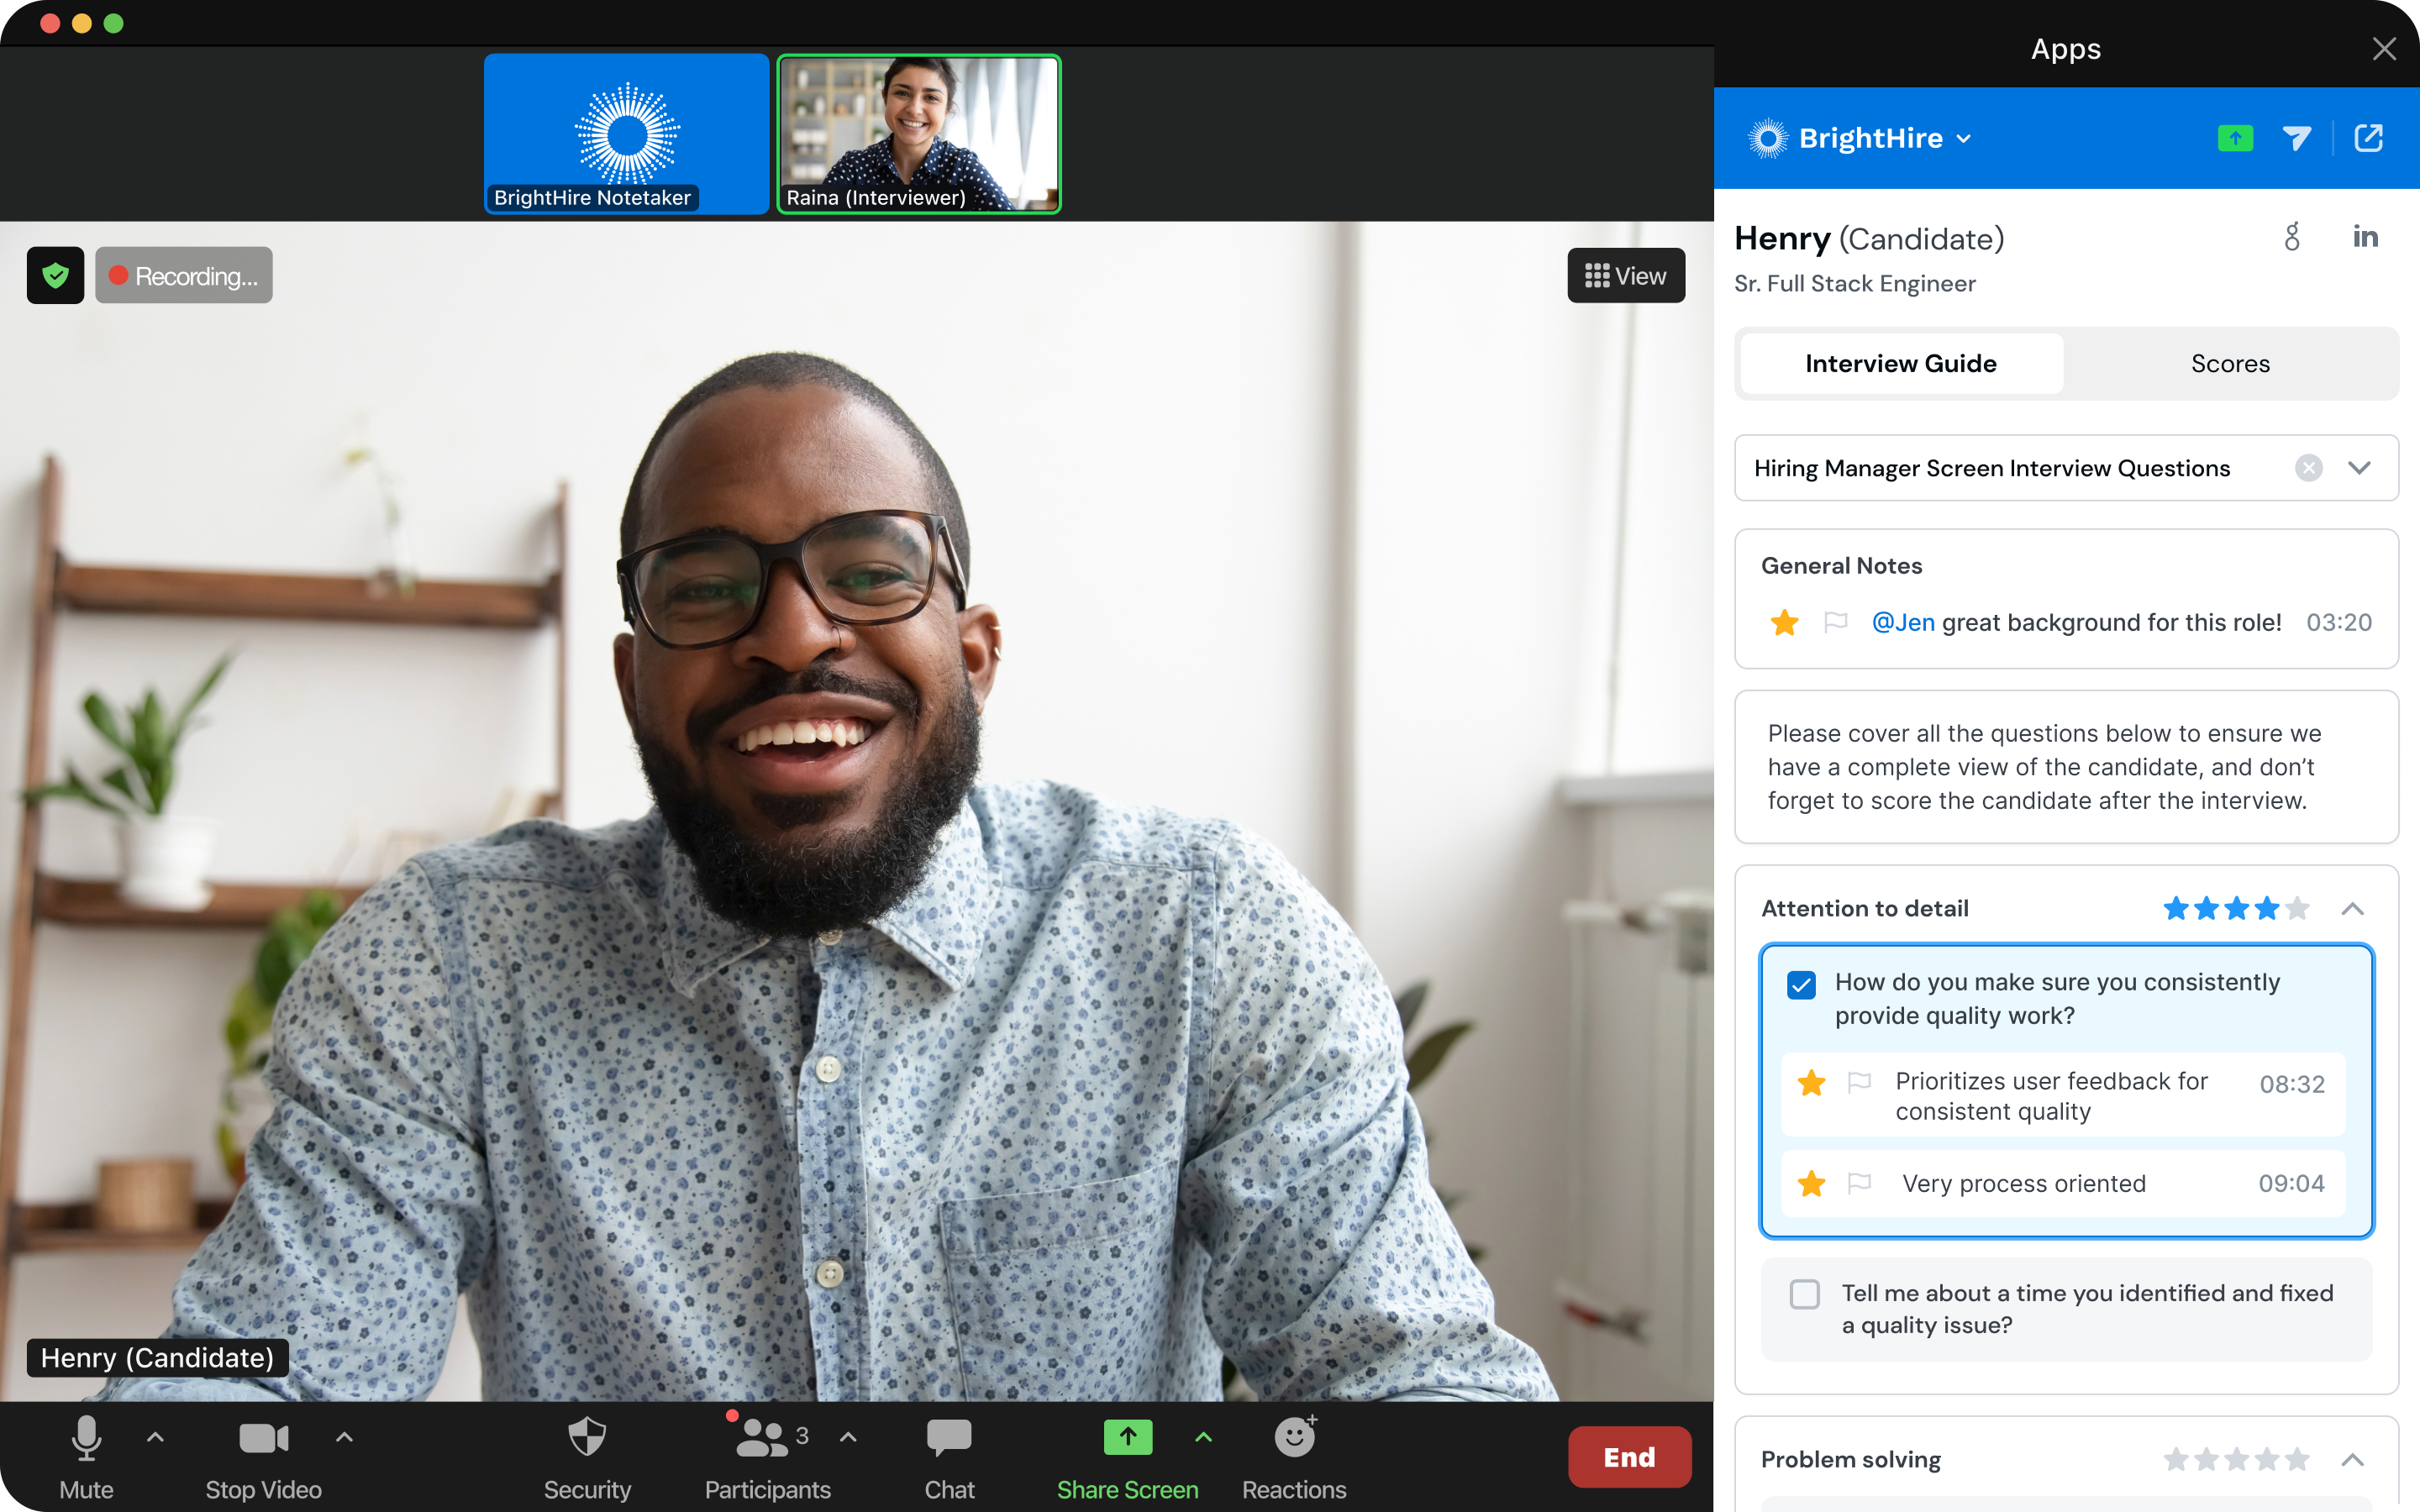 BrightHire Interview Assistant app is only visible to the interviewer appearing on the right panel of the Zoom Meeting. Questions appear for the interviewer to ask and interview feedback is logged in real time.